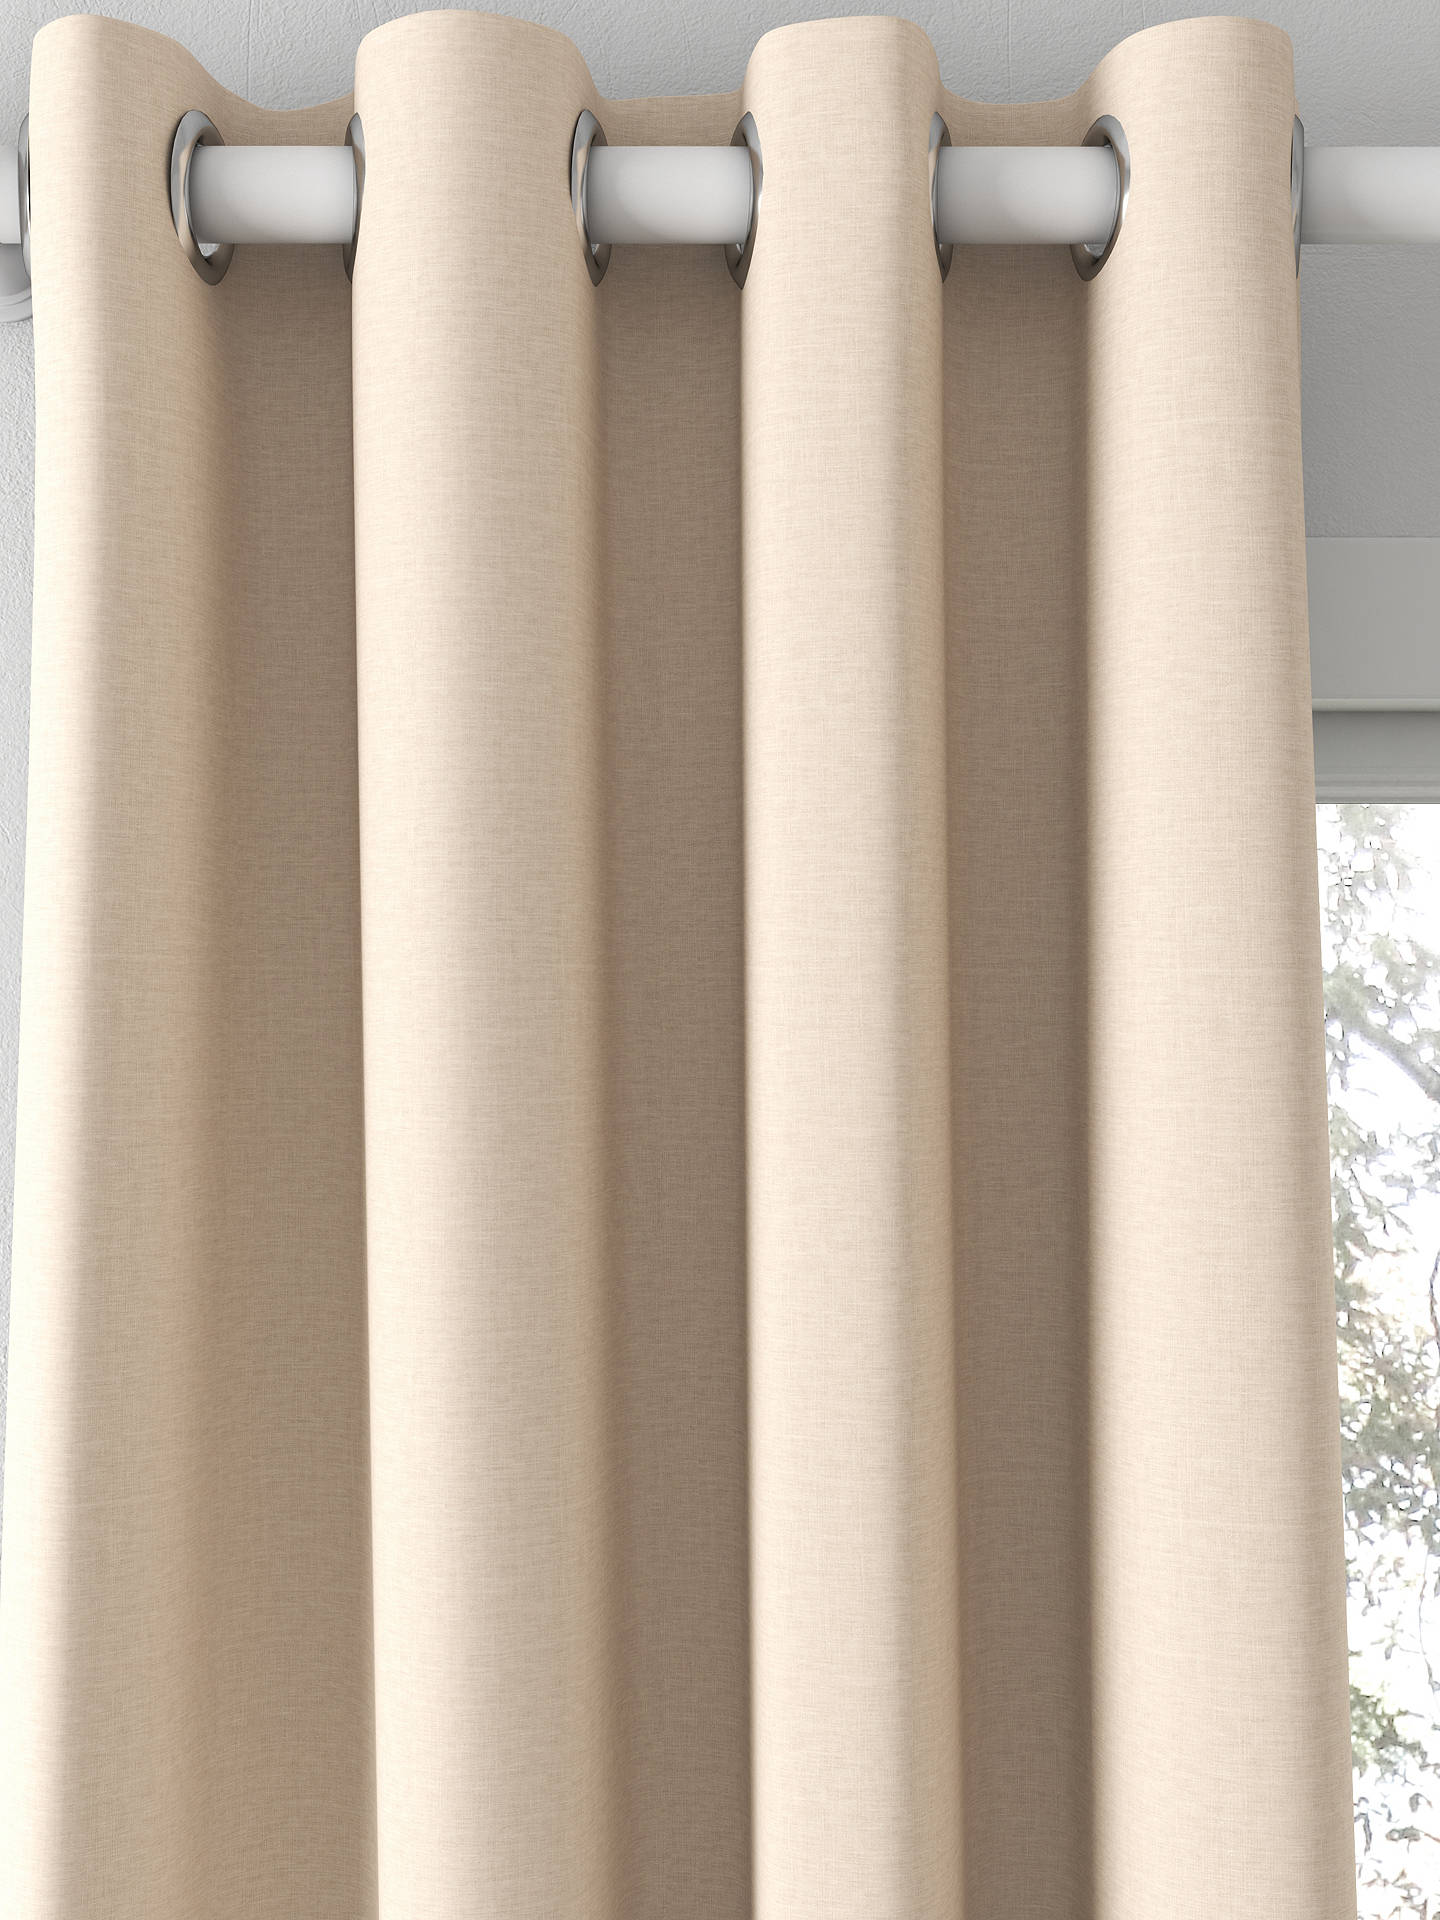 John Lewis & Partners Cotton Blend Made to Measure Curtains, Putty